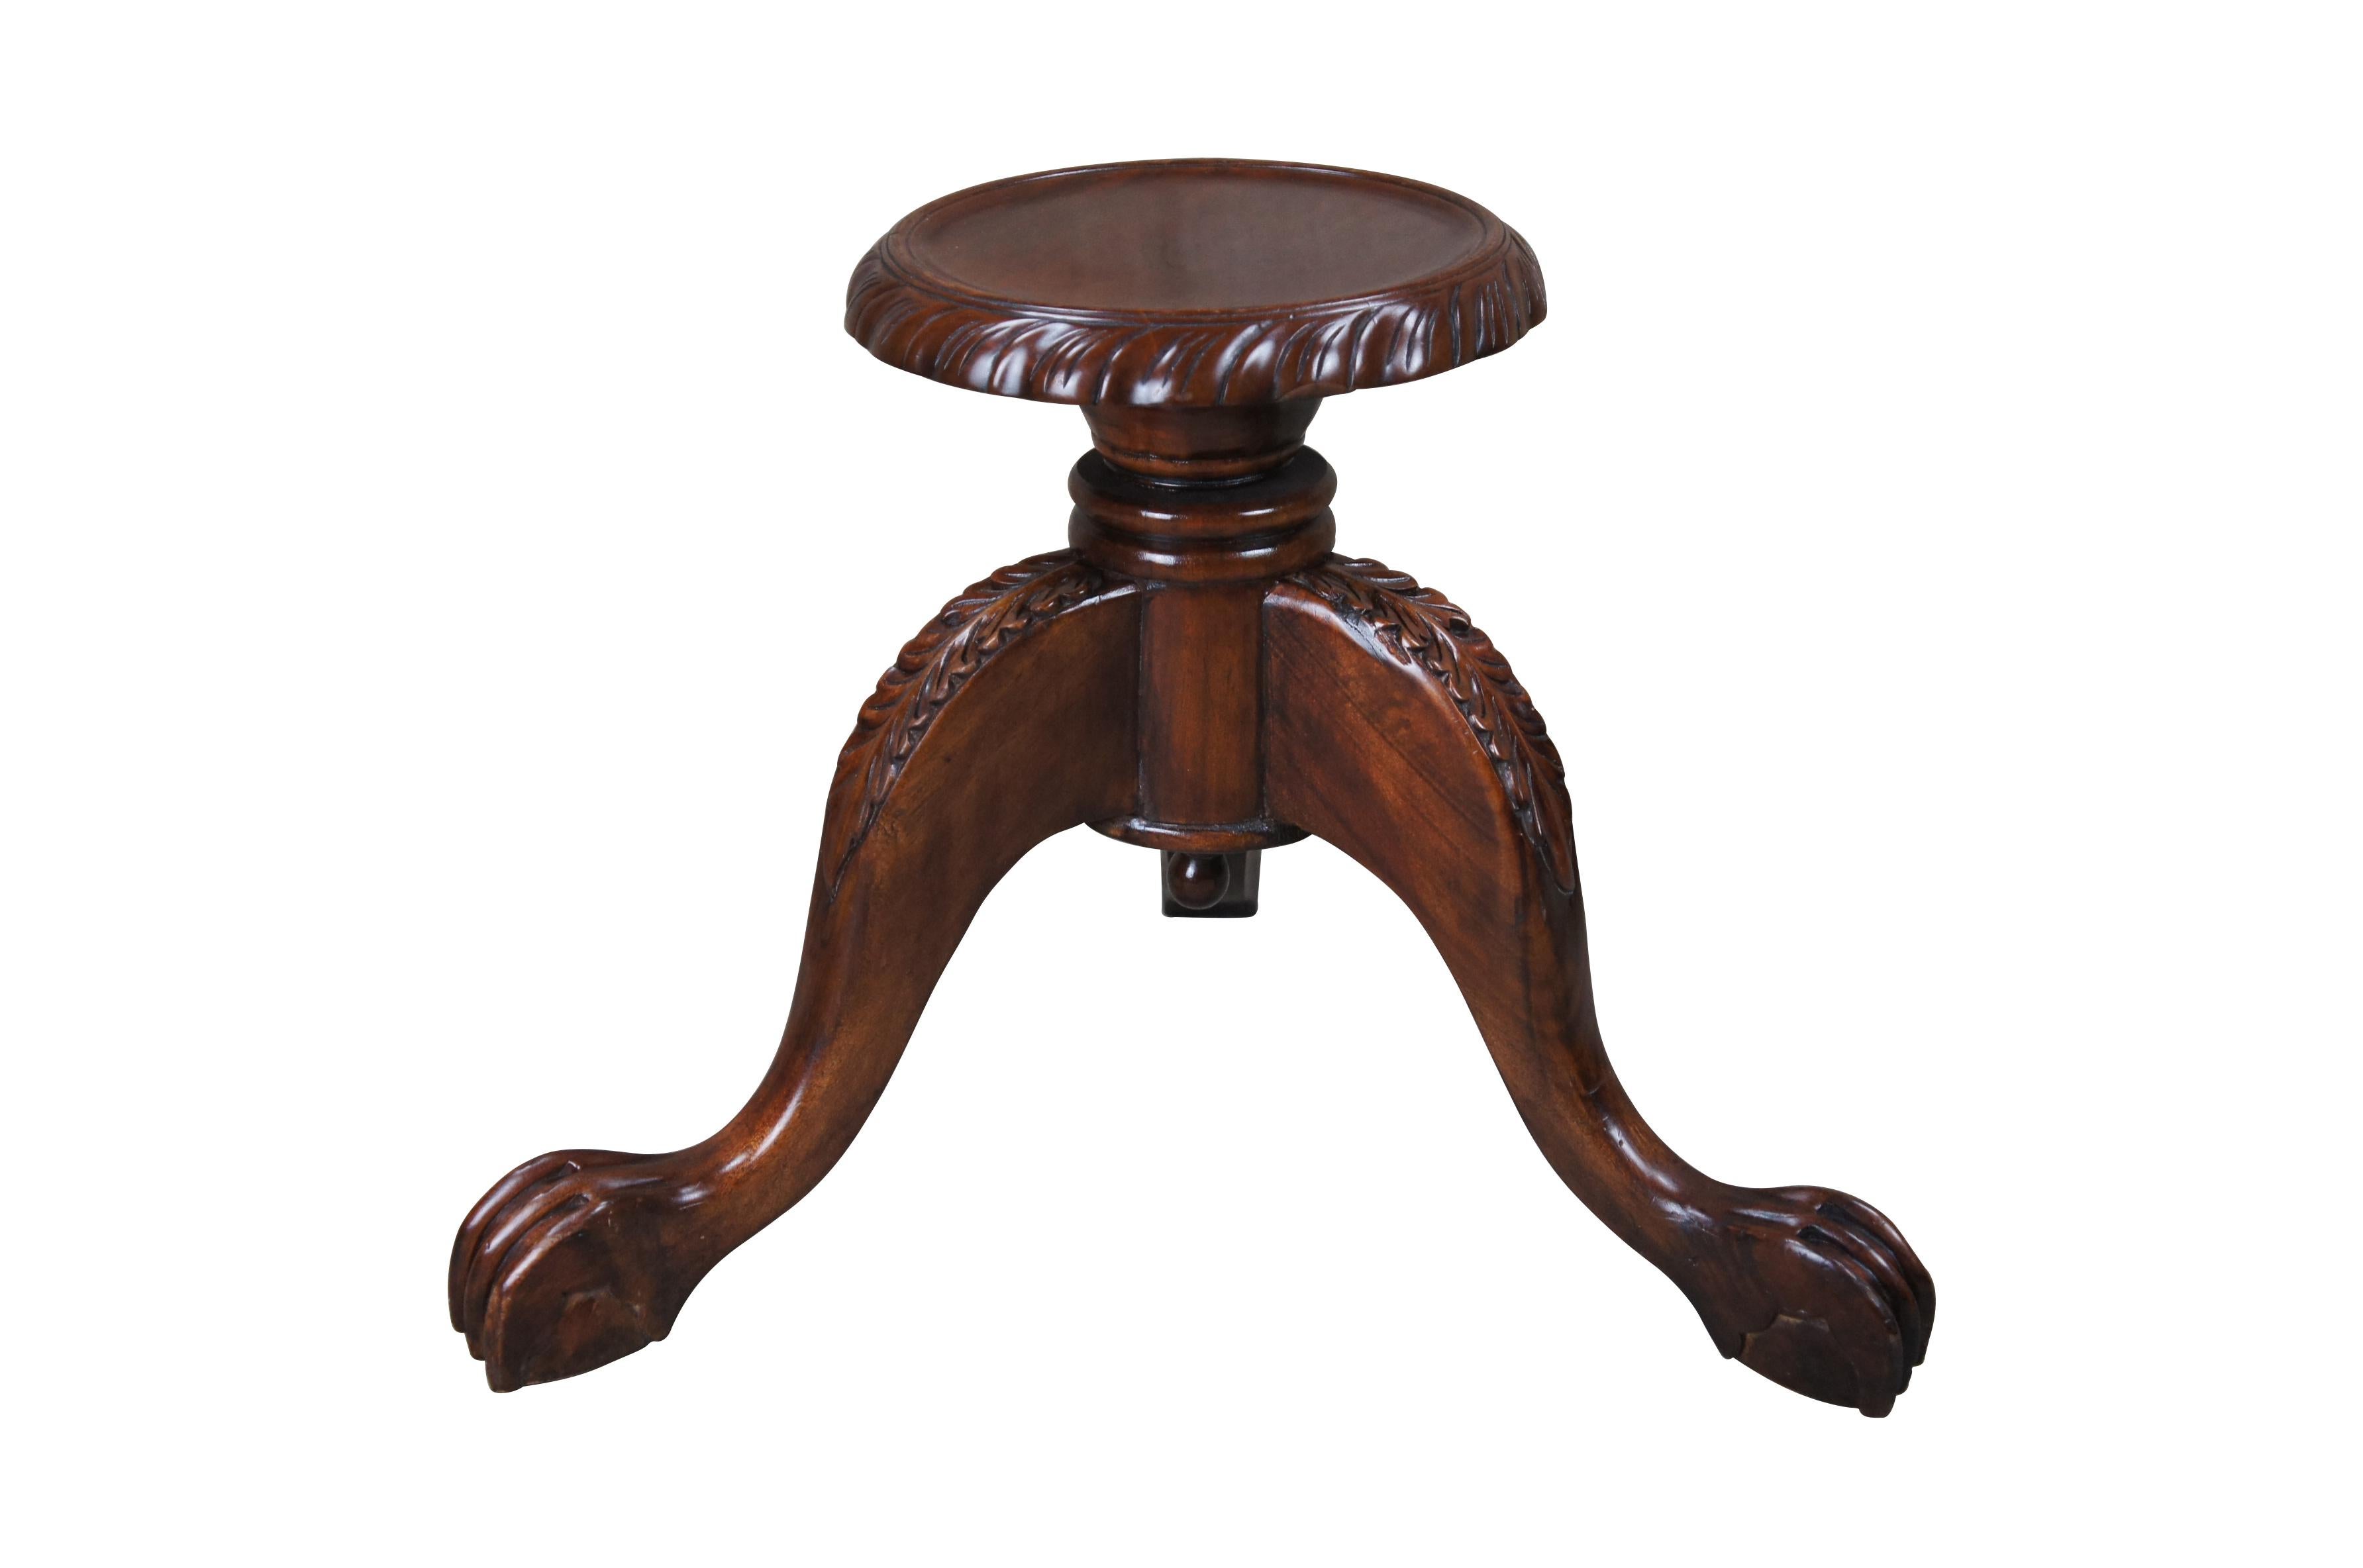 A beautiful 20th century carved mahogany low plant / candle stand or sculpture pedestal.  Features a circular top with gadrooning along the edge.  The top is supported by a bell shaped support with a ribbed base over three downswept cabriole legs. 